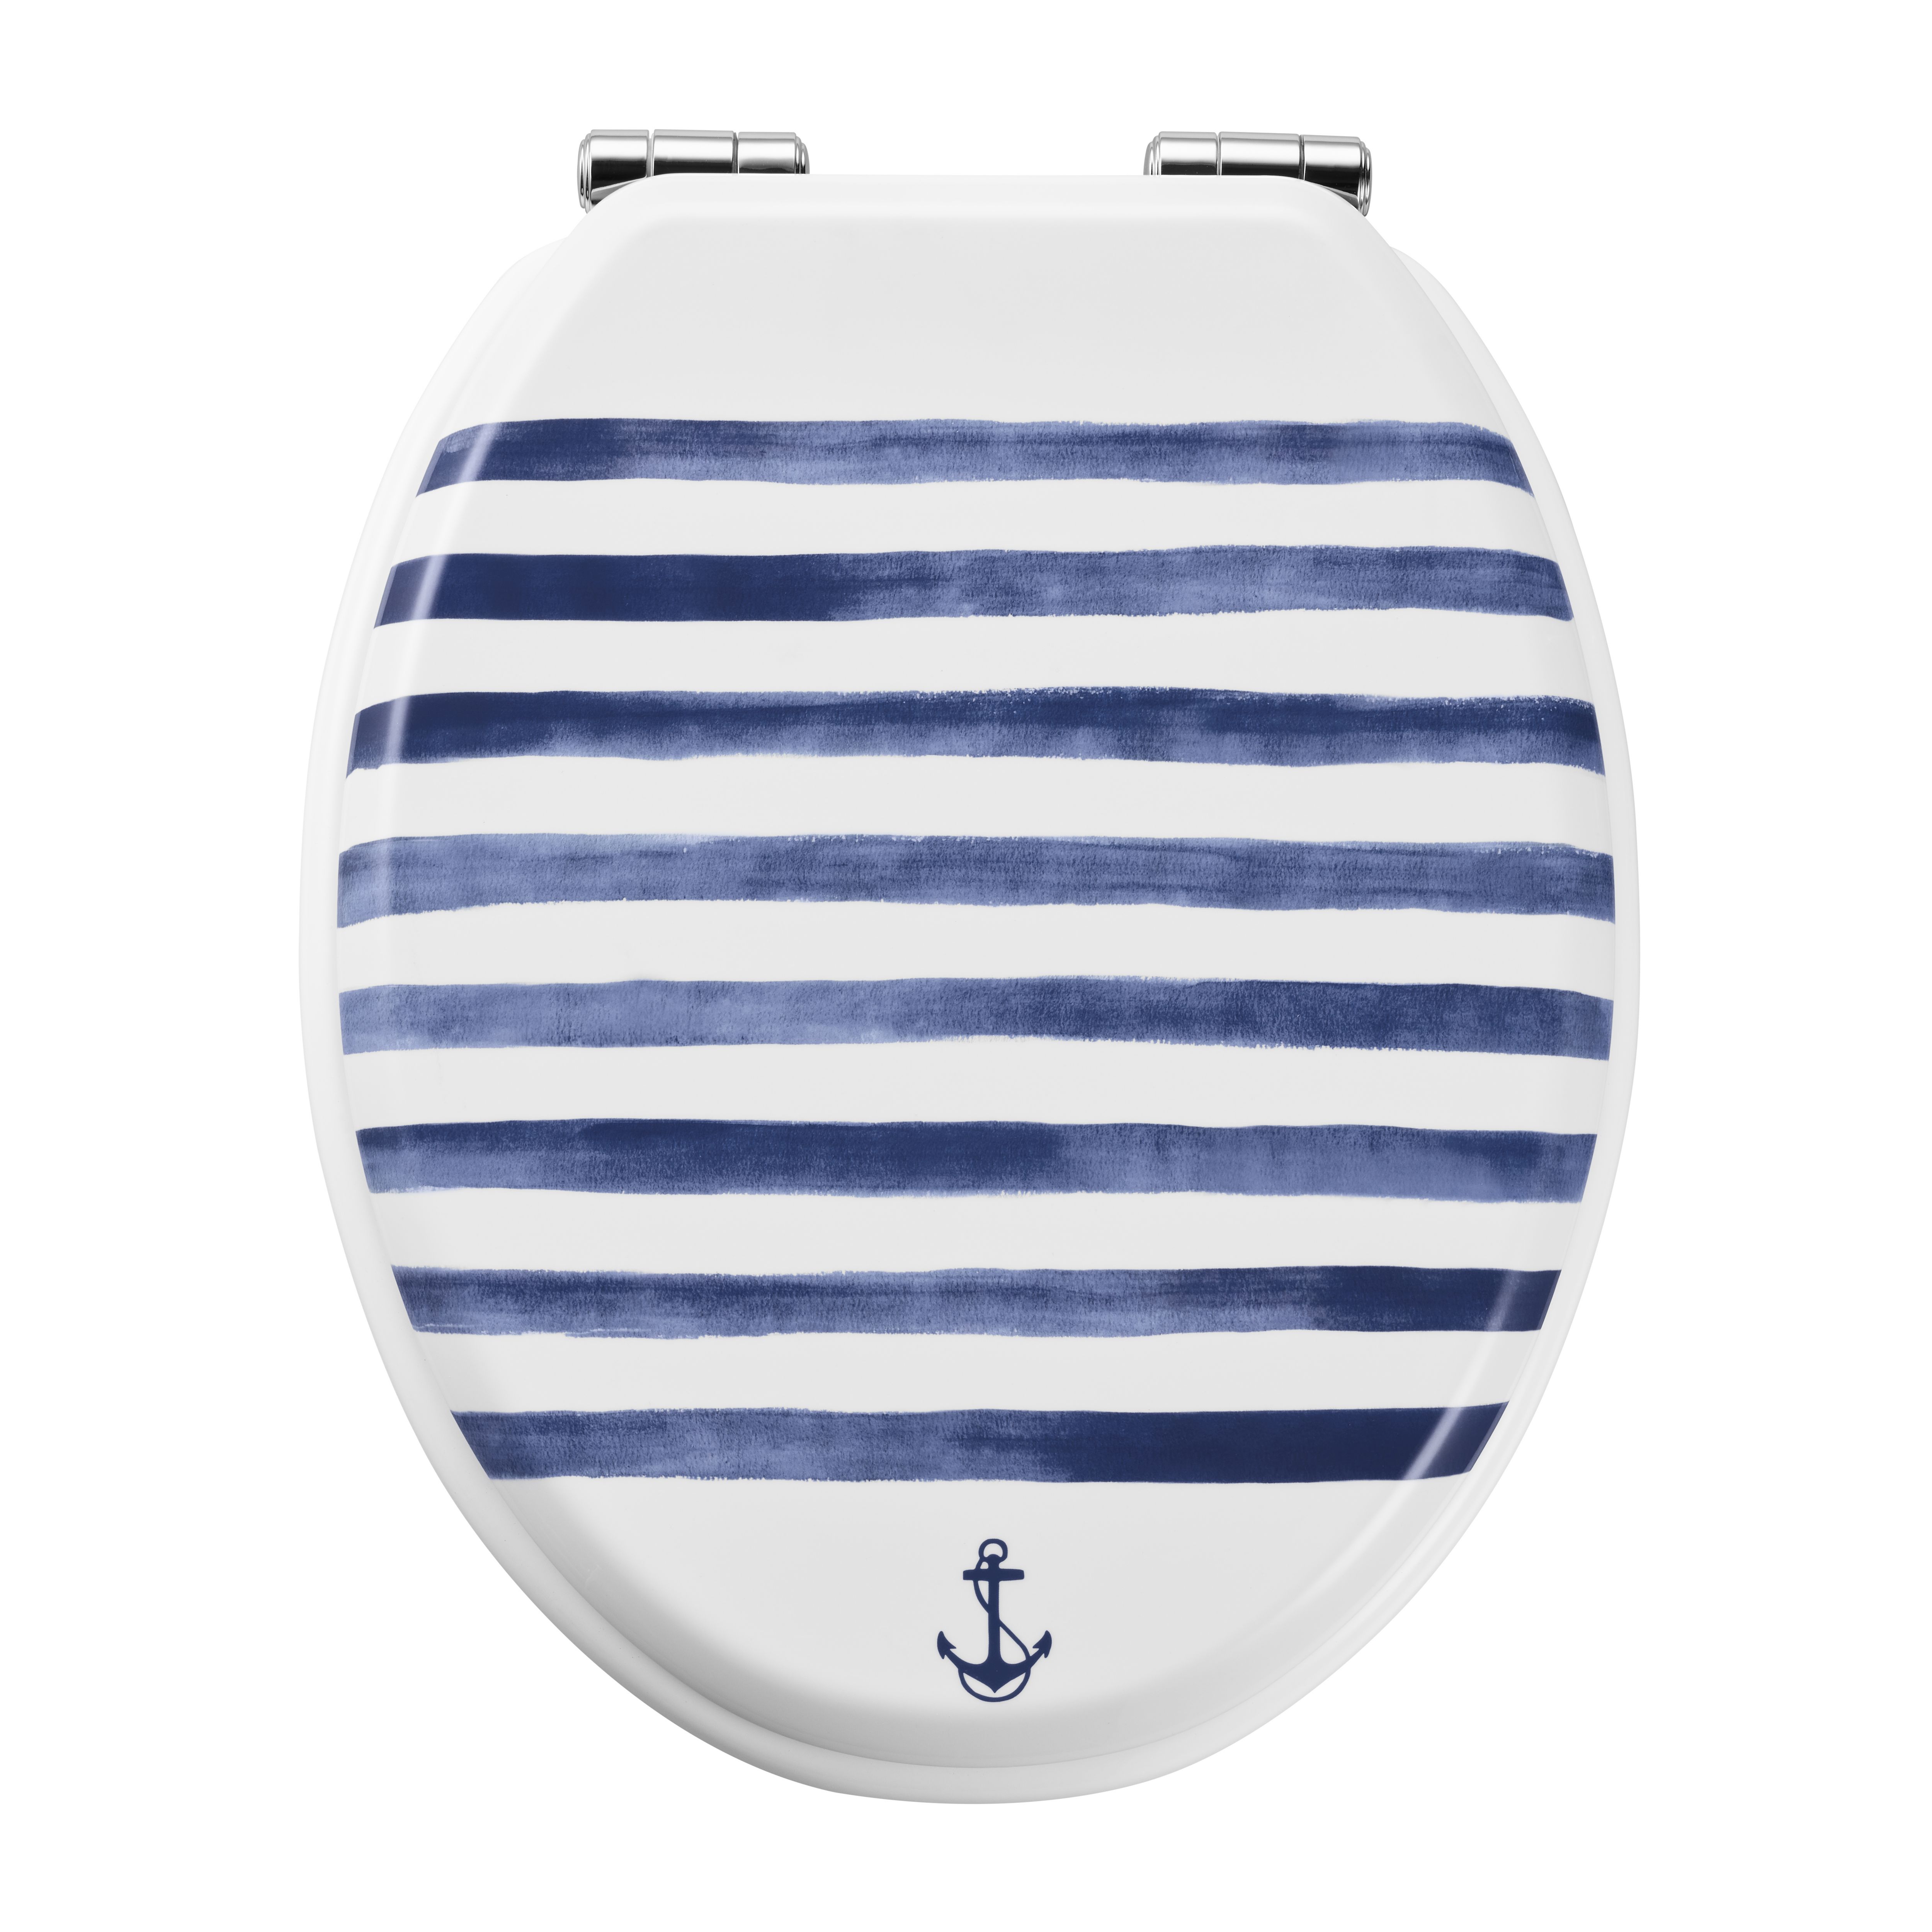 GoodHome Pilica Anchor White & blue Standard Soft close Toilet seat